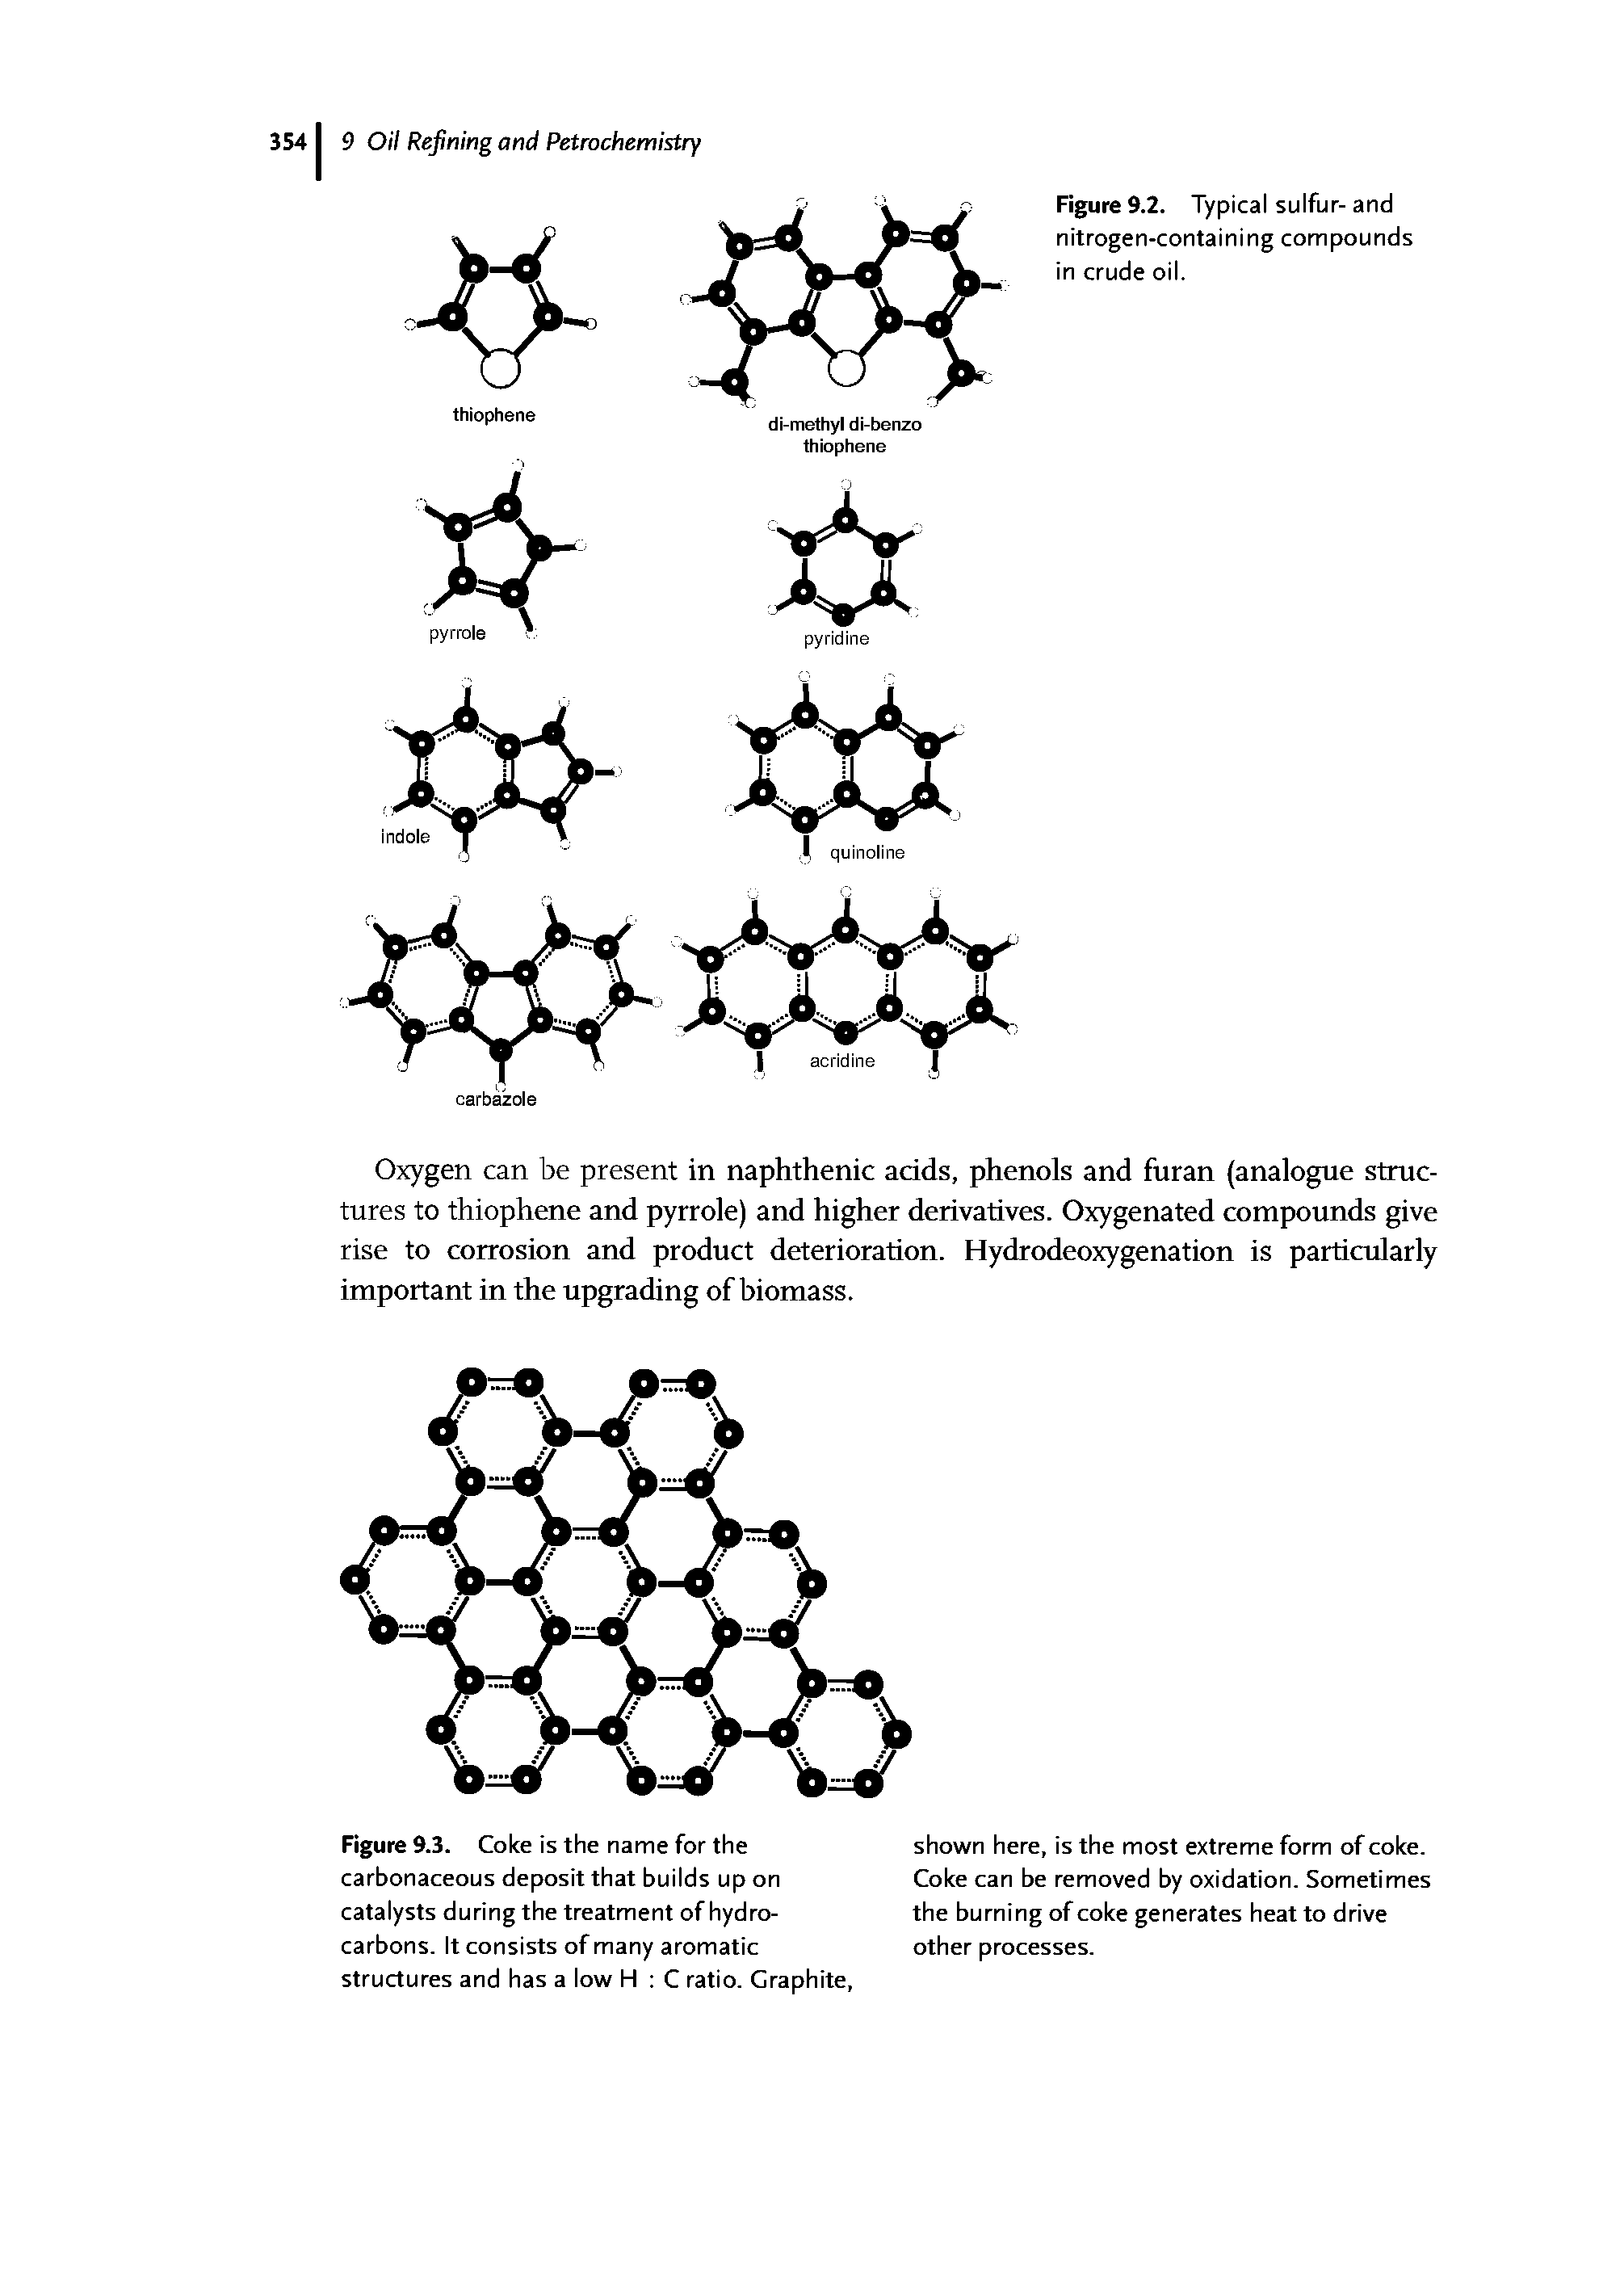 Figure 9.2. Typical sulfur- and nitrogen-containing compounds in crude oil.